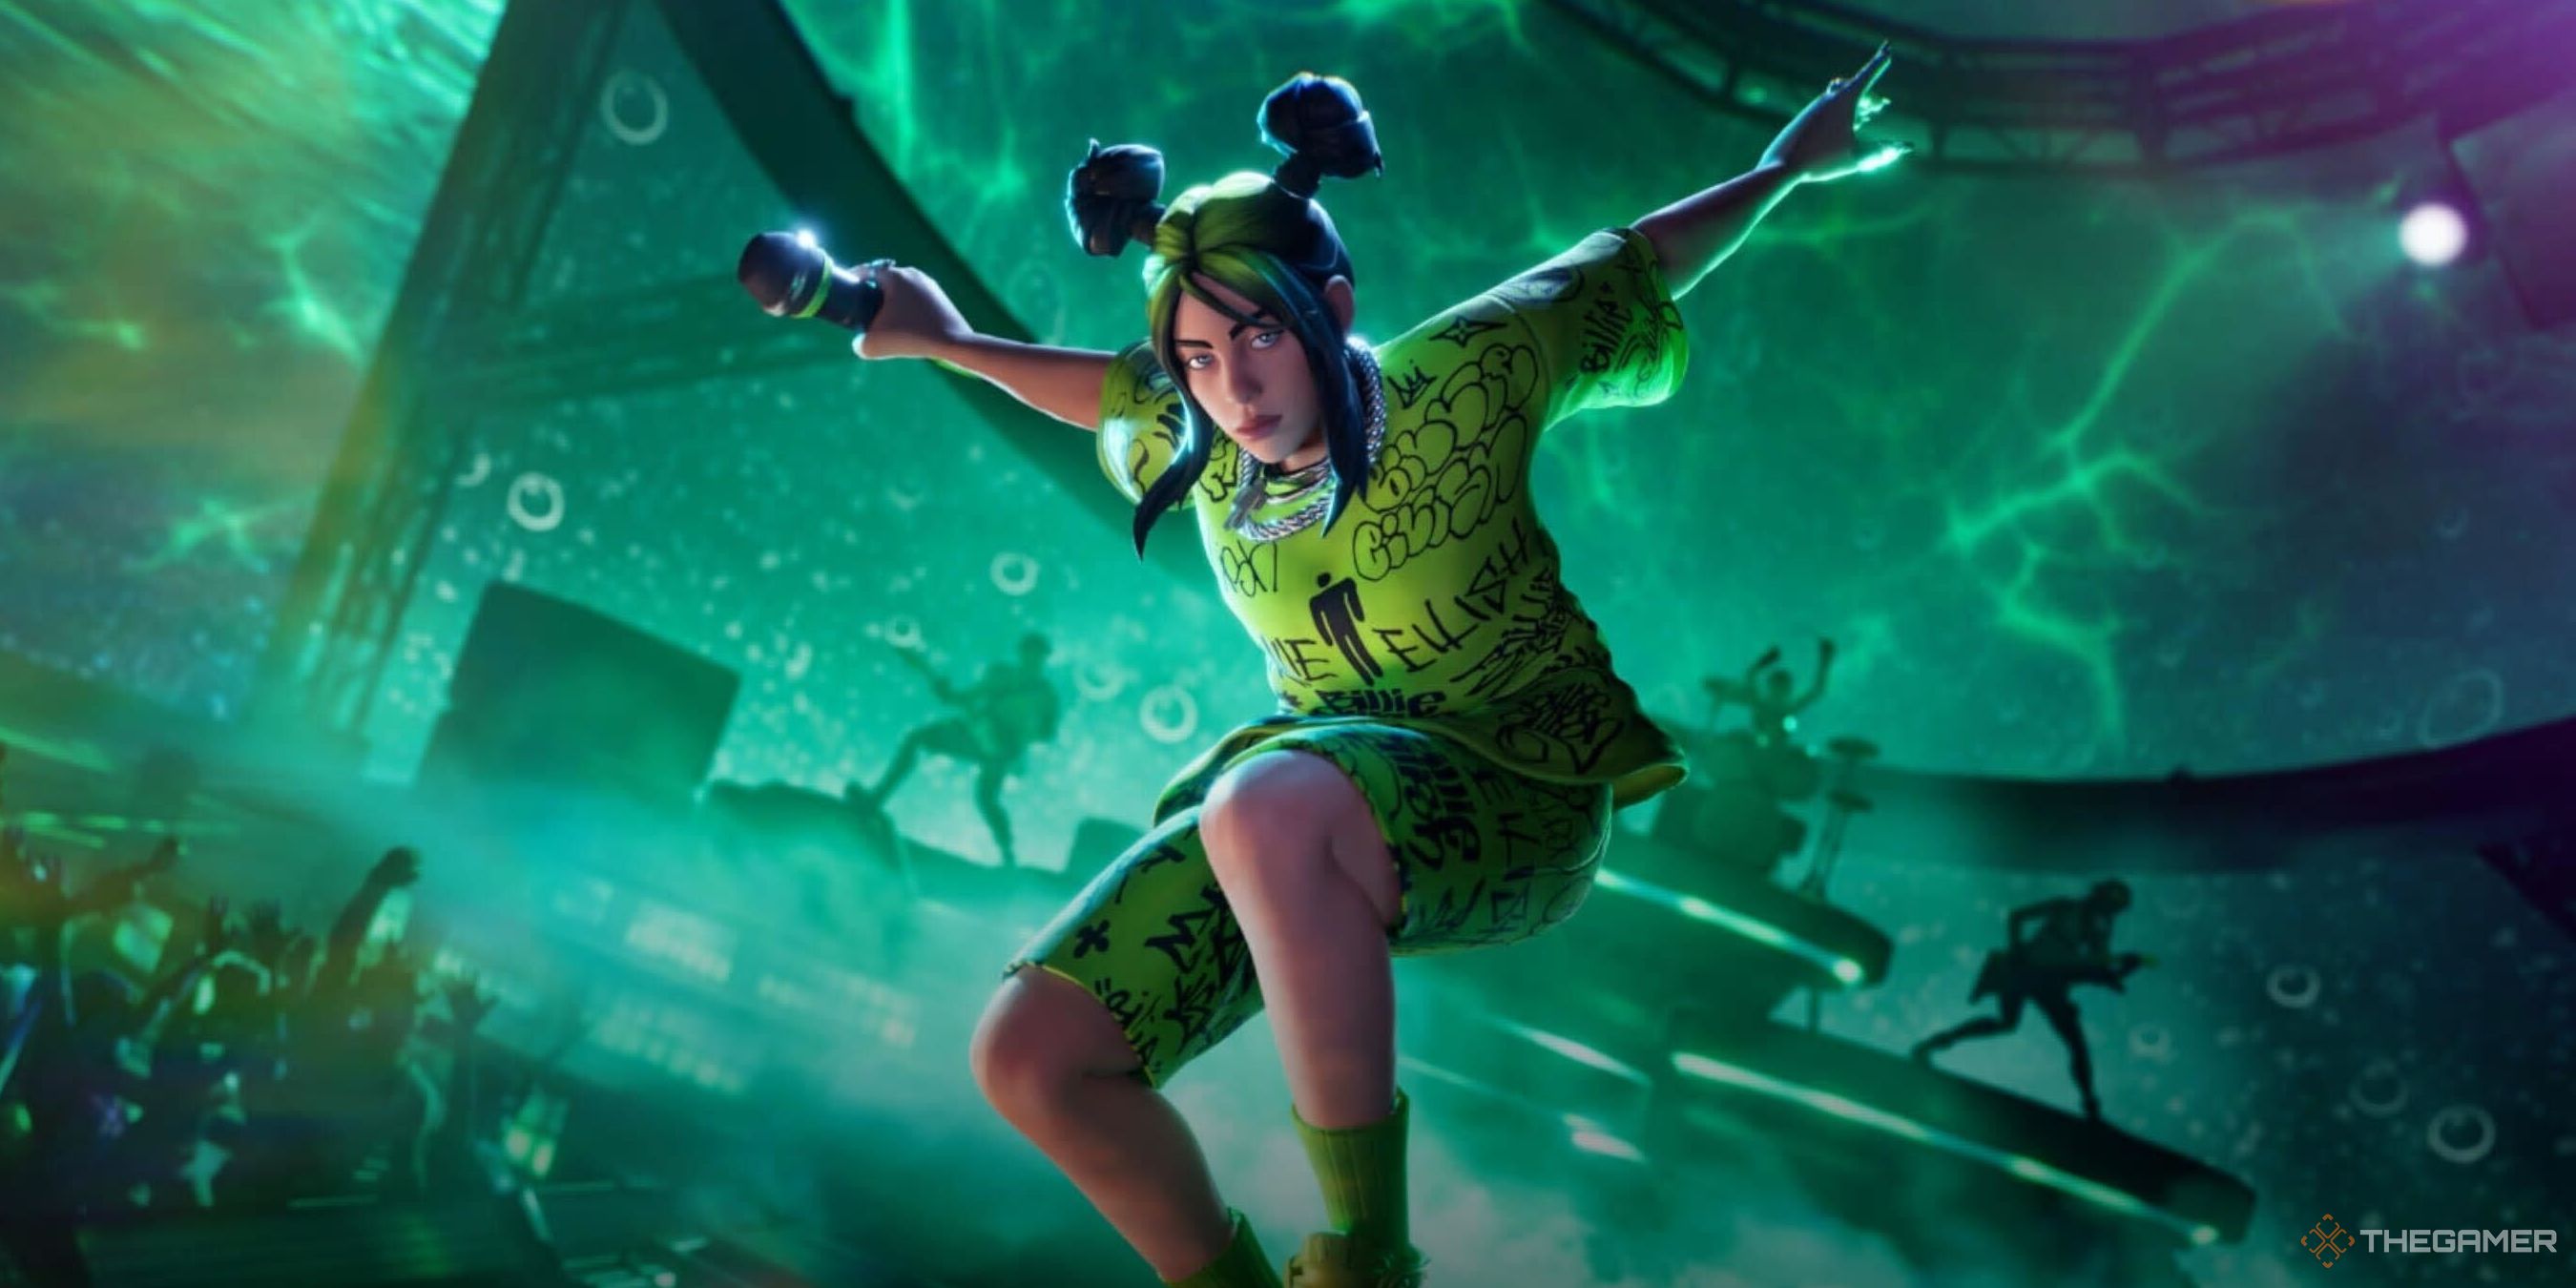 A screenshot from Fortnite showing the Billie Eilish skin mid-jump with a microphone in her hand. A tinted green band on stage and audience can be seen behind her.